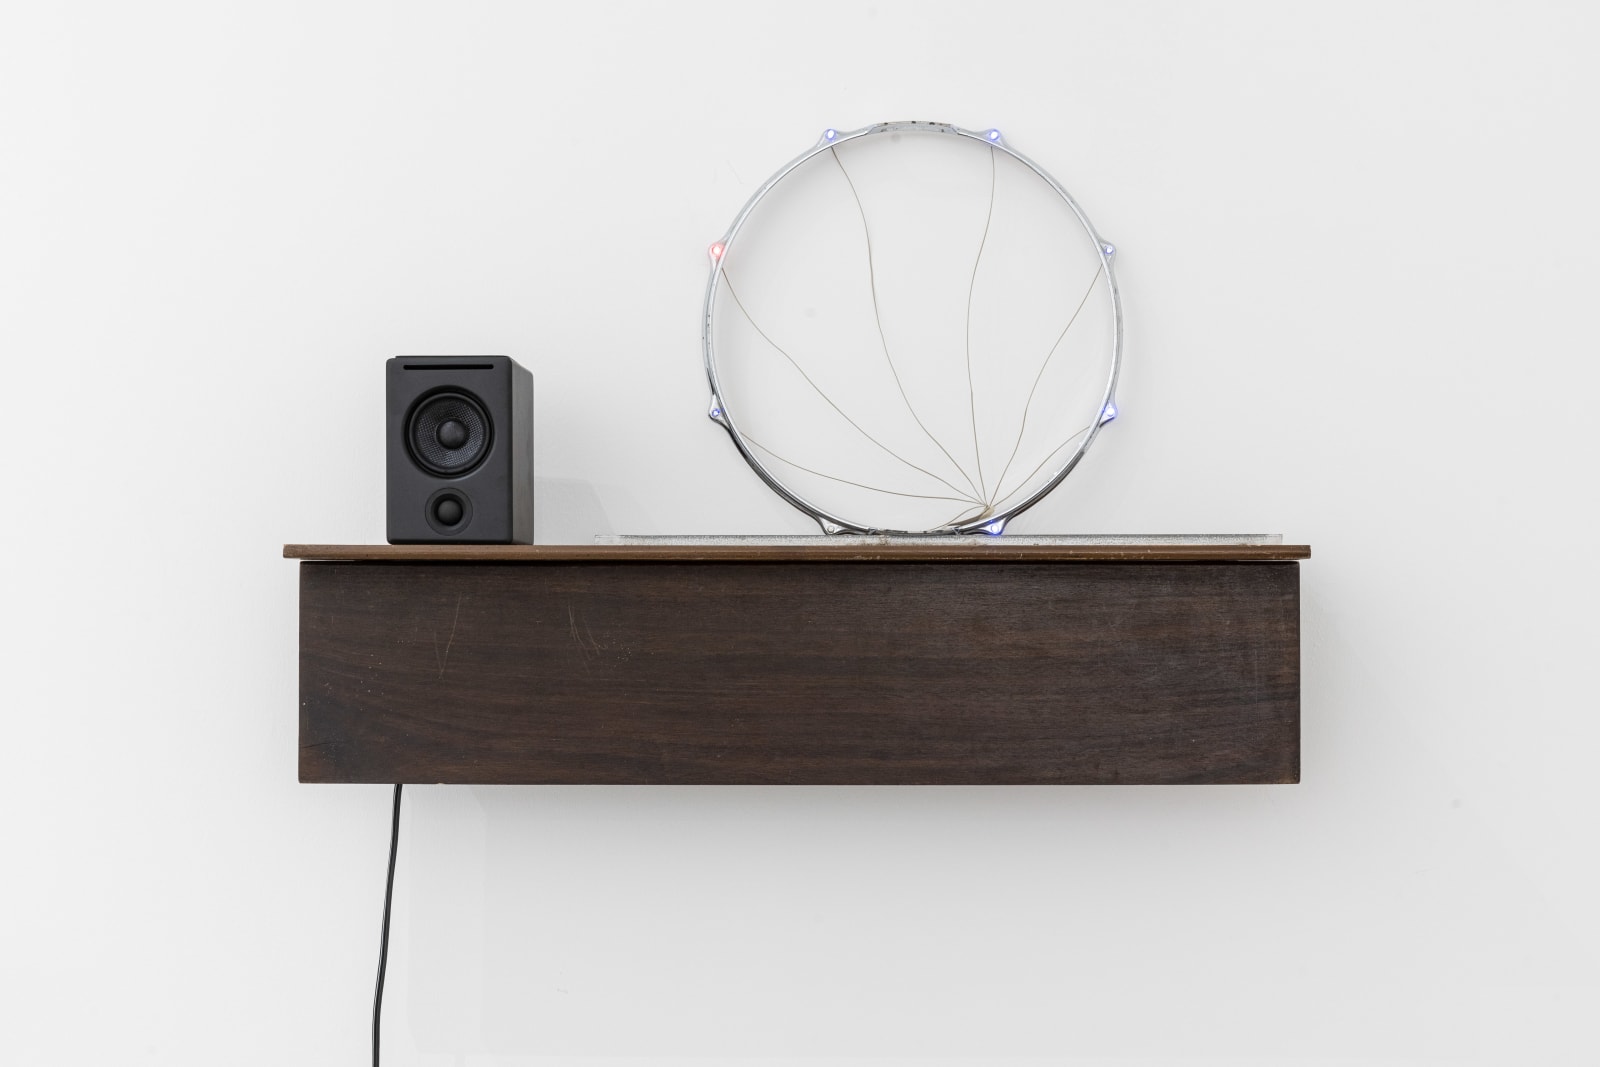 Haroon Mirza, Untitled Song #6, 2012